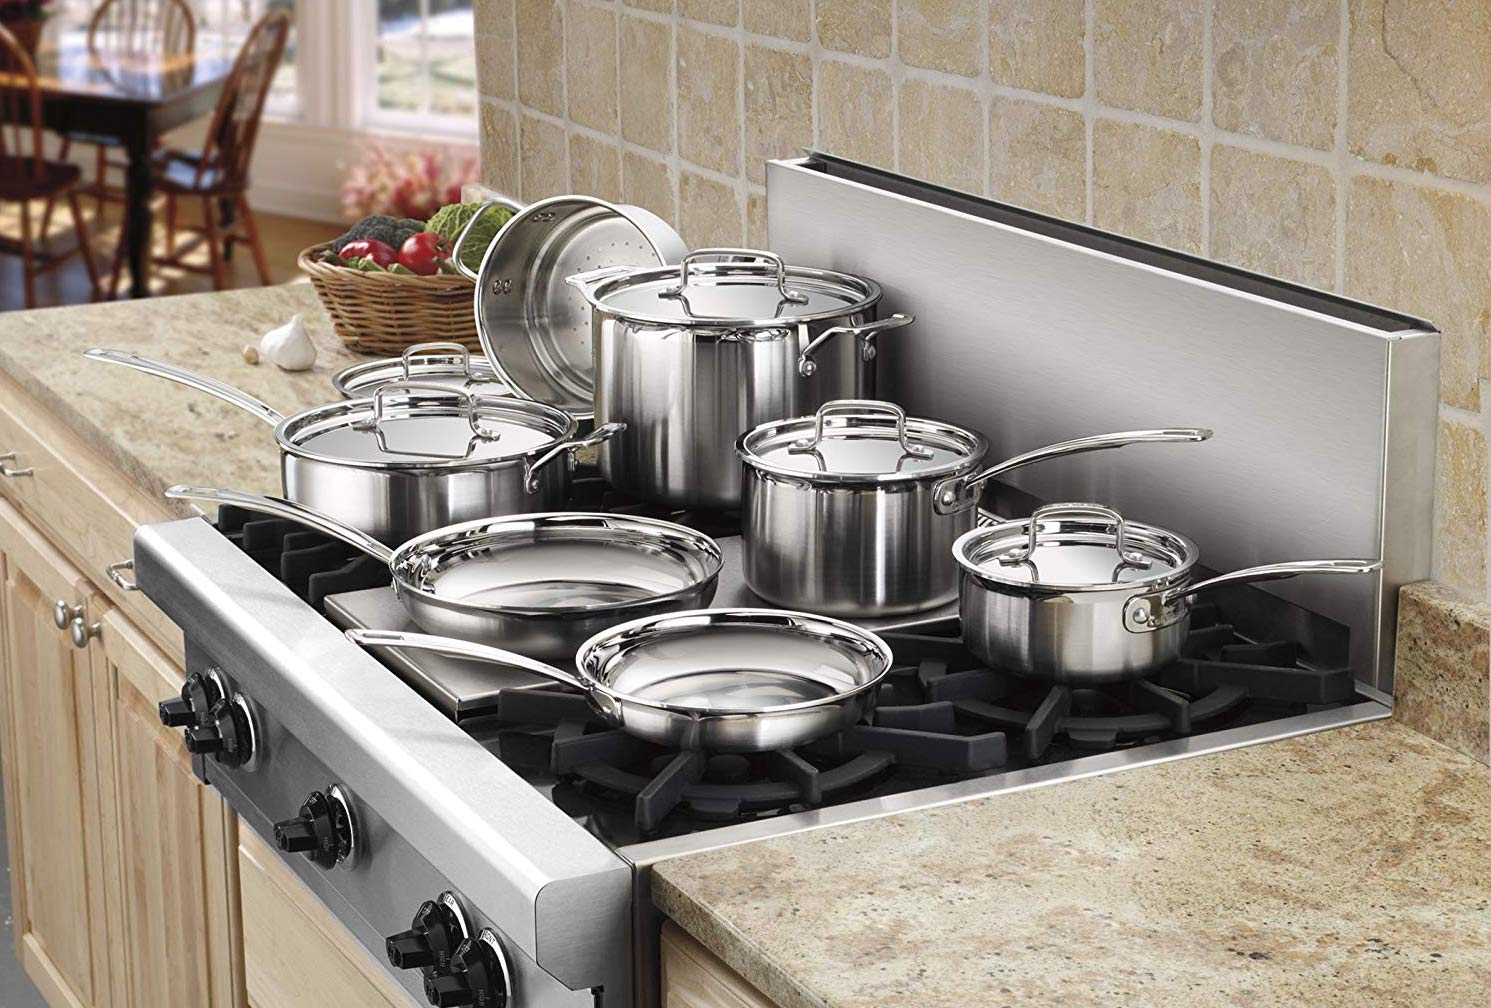 Top 10 Best Stainless Steel Cookware Sets in 2020 Reviews